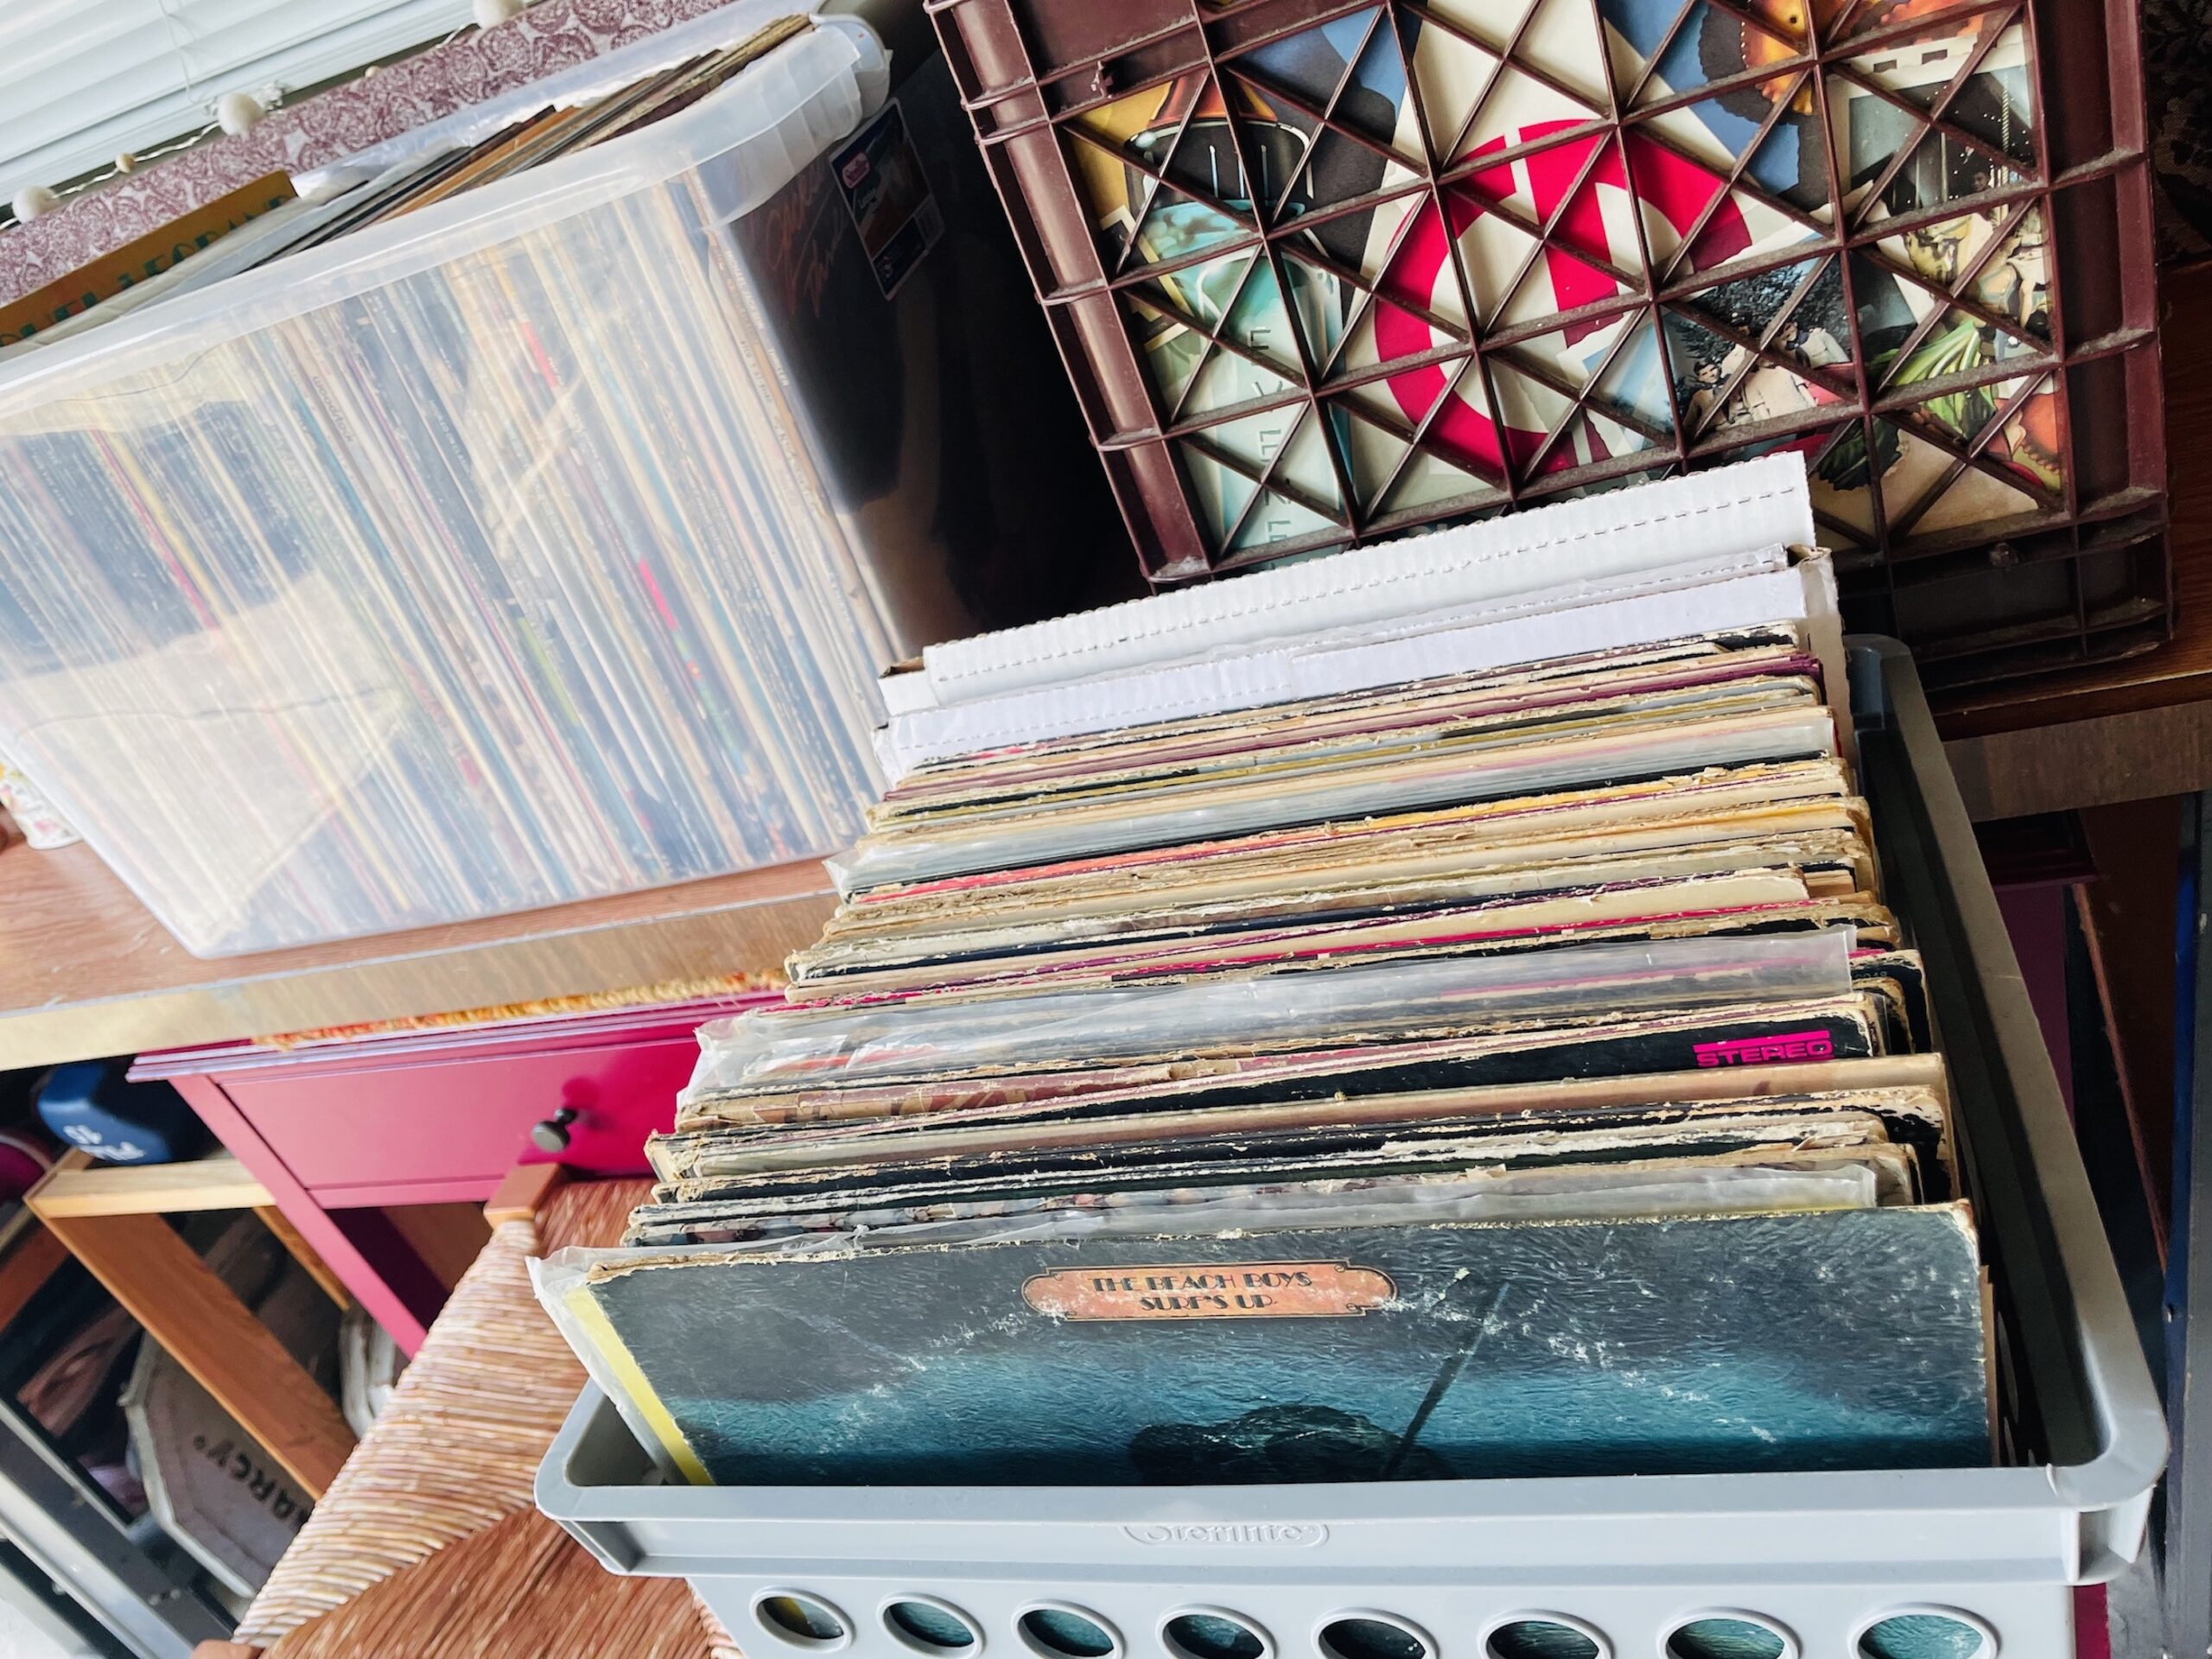 How to Move Your Huge Record Collection in 10 Steps